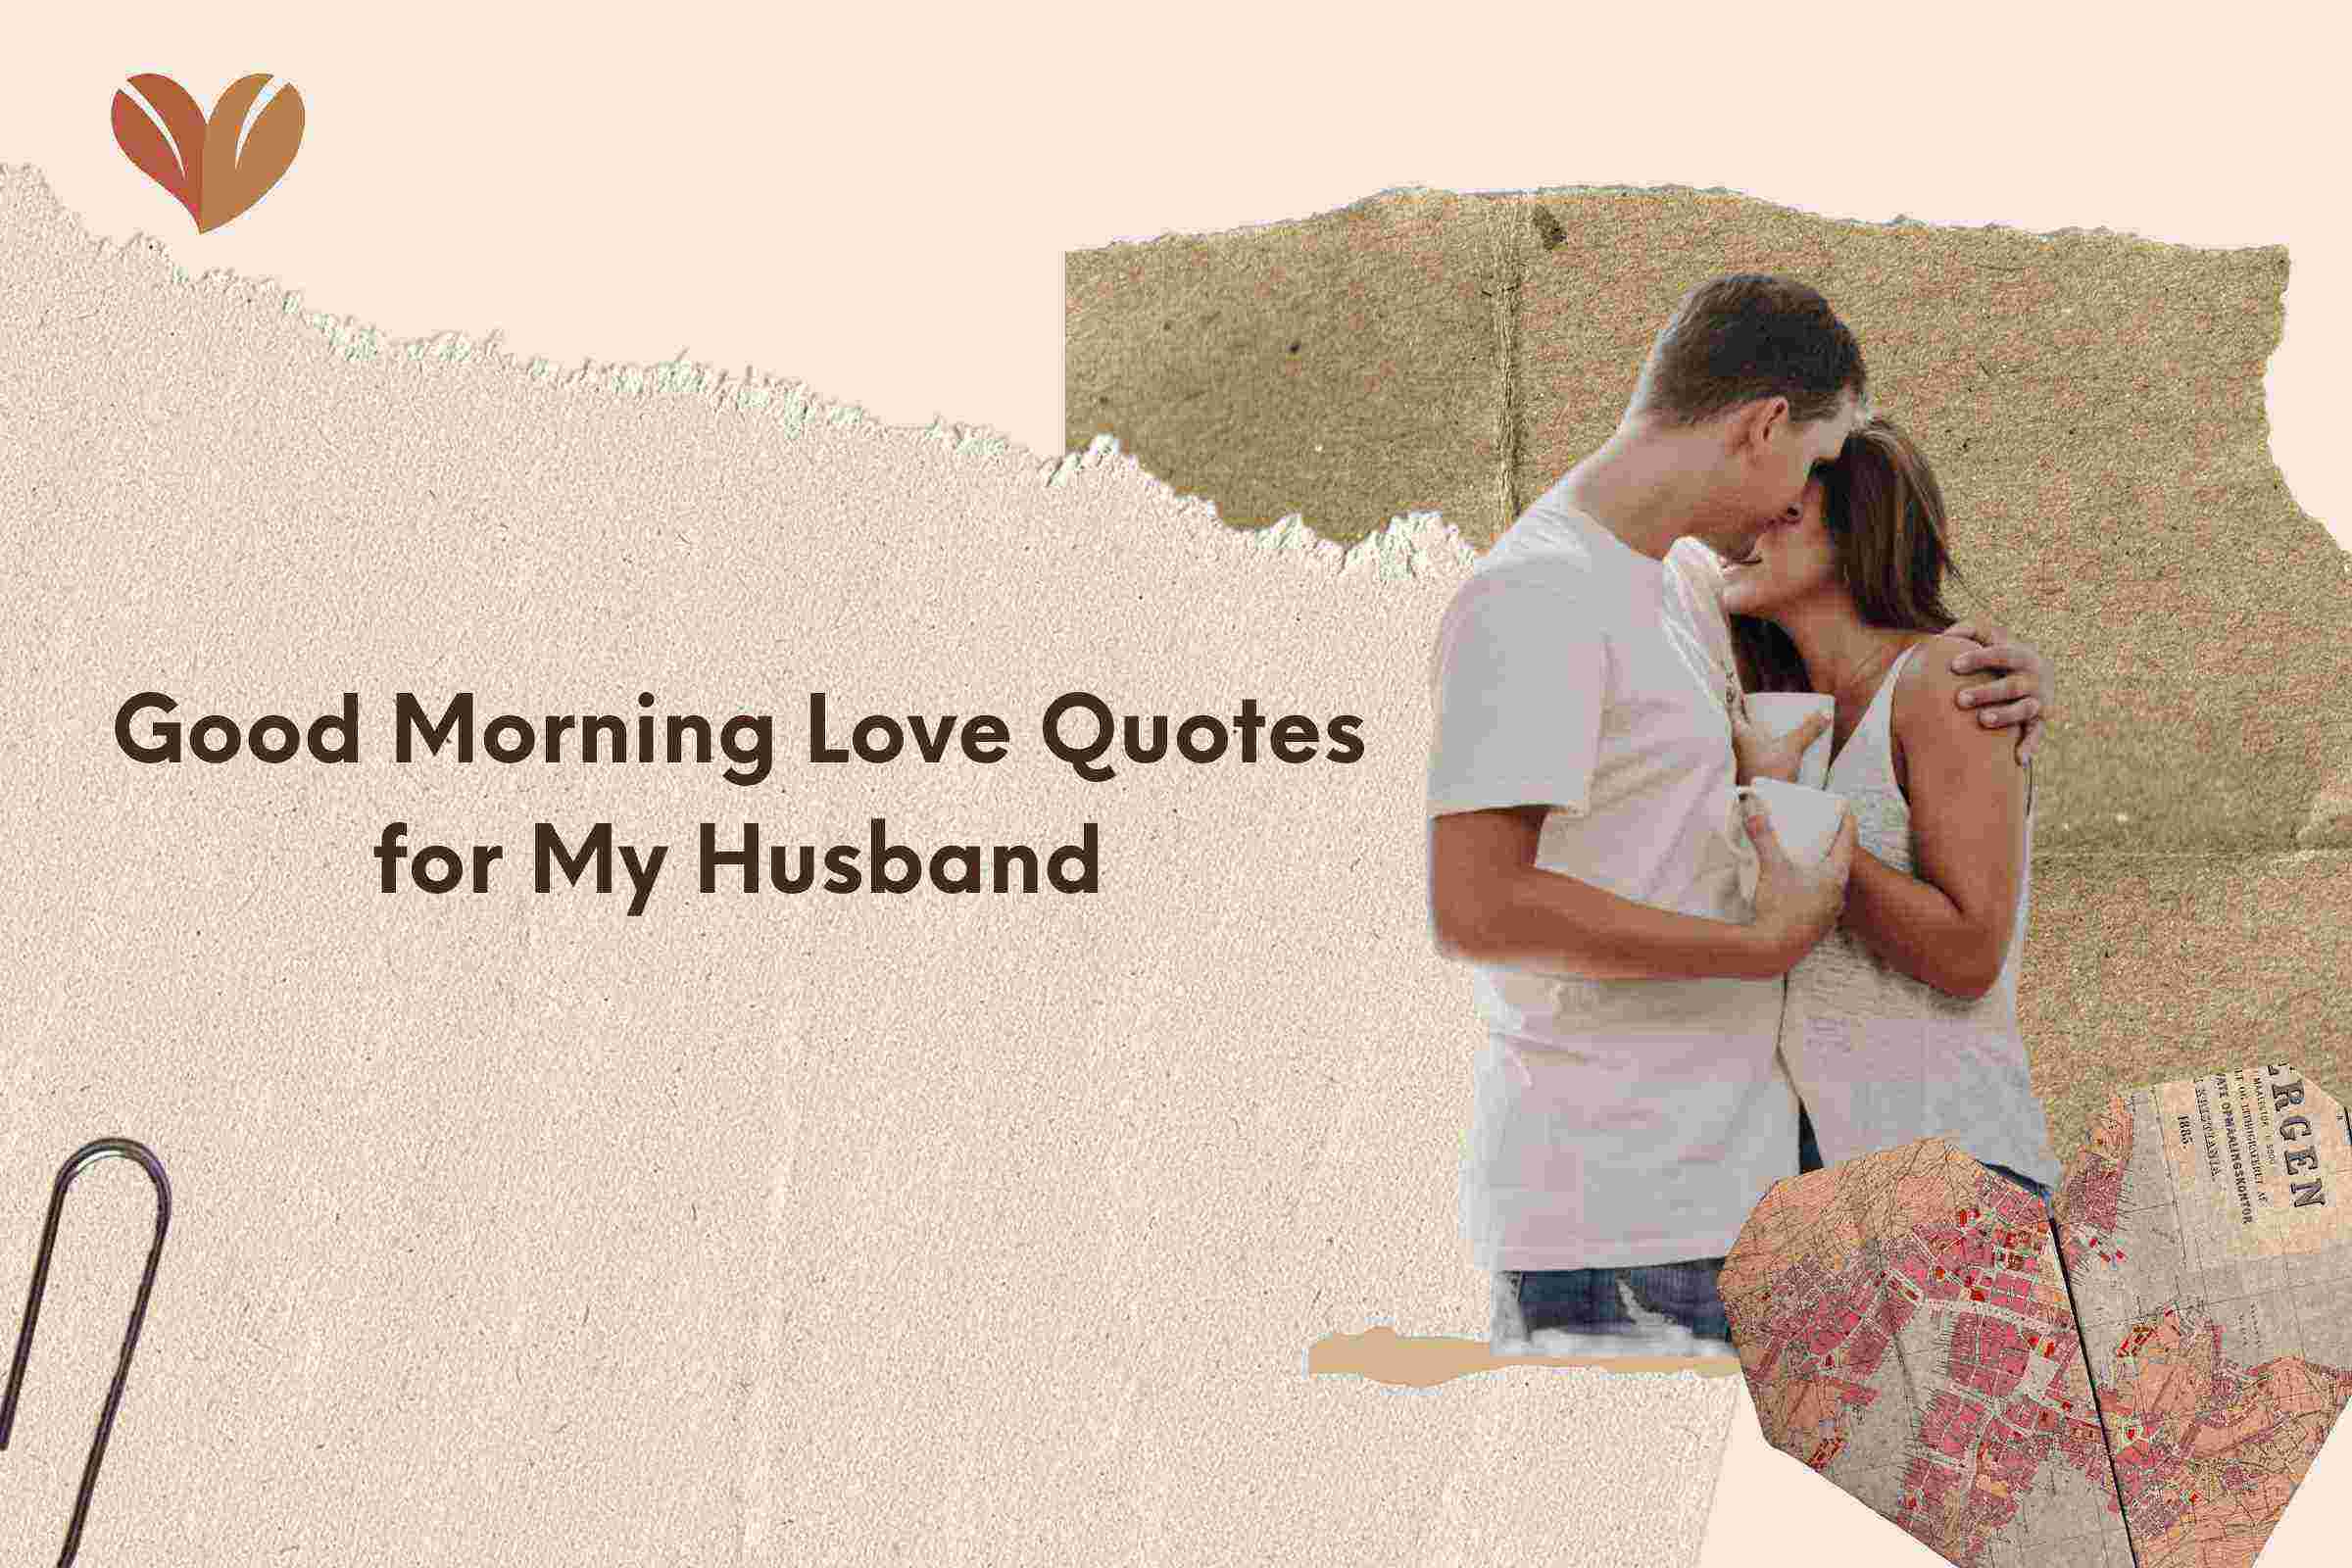 Good Morning Love Quotes for My Husband